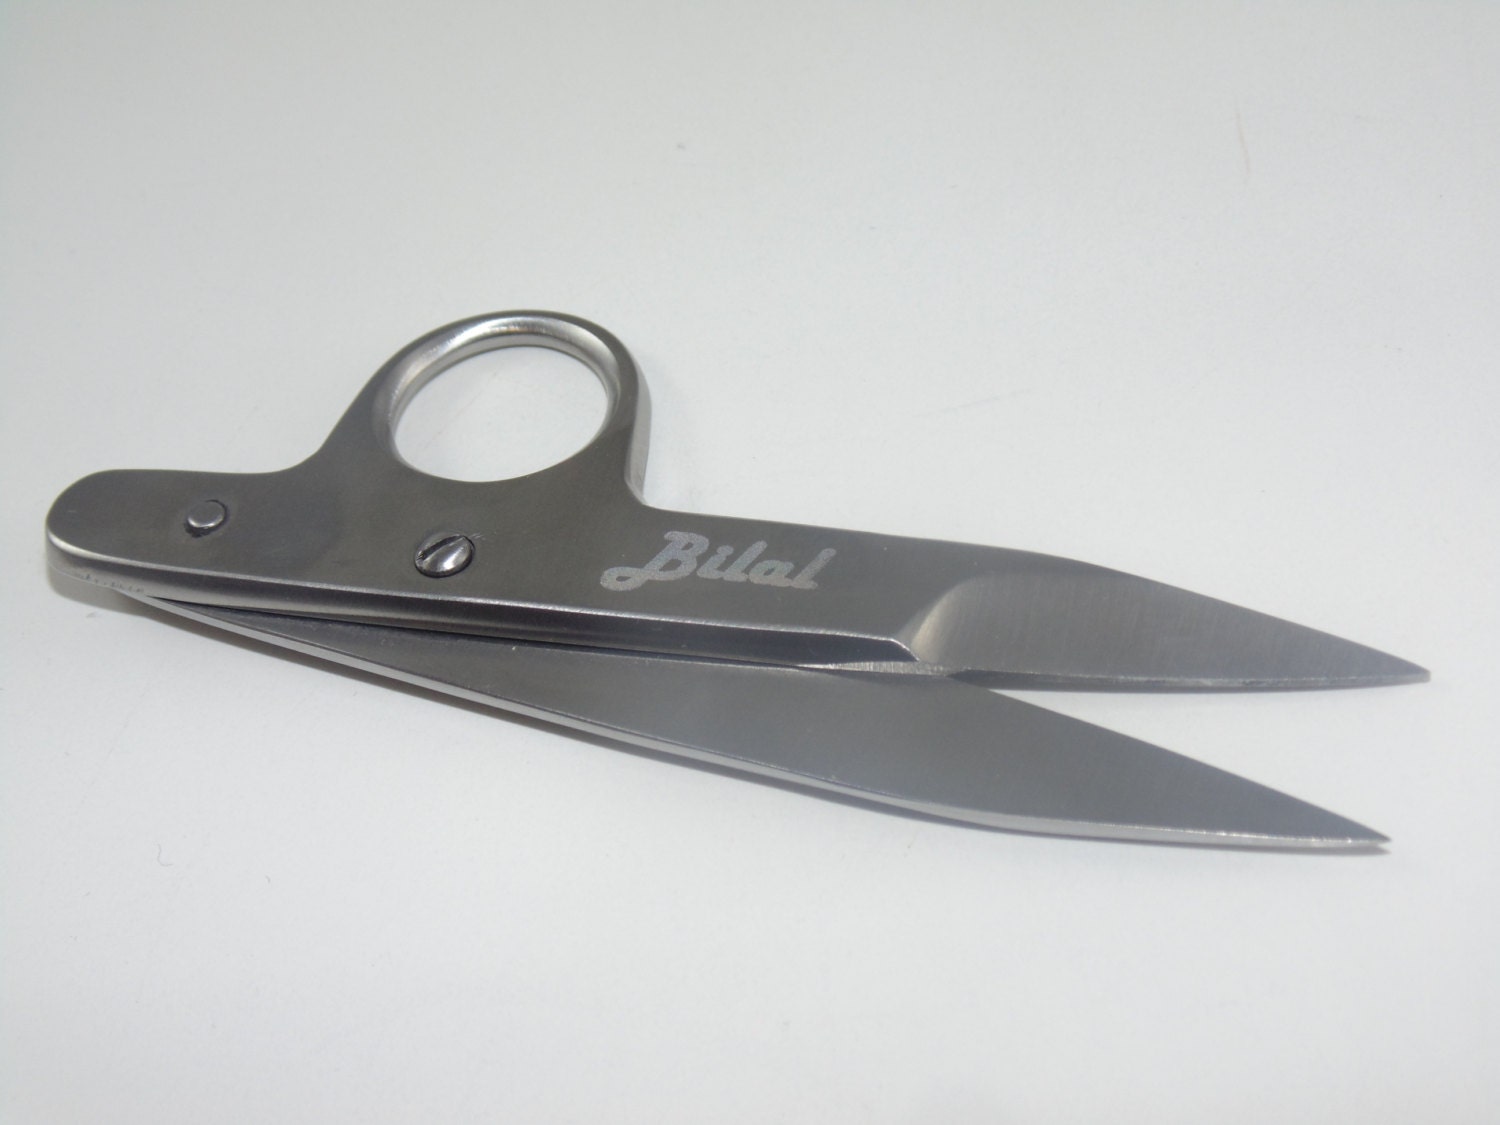 Gingher Featherweight Thread-snips, 4 Spring-action, Thread Snips,  Stainless Steel Blades, Glass-filled Nylon Frame, Protective Cap, 